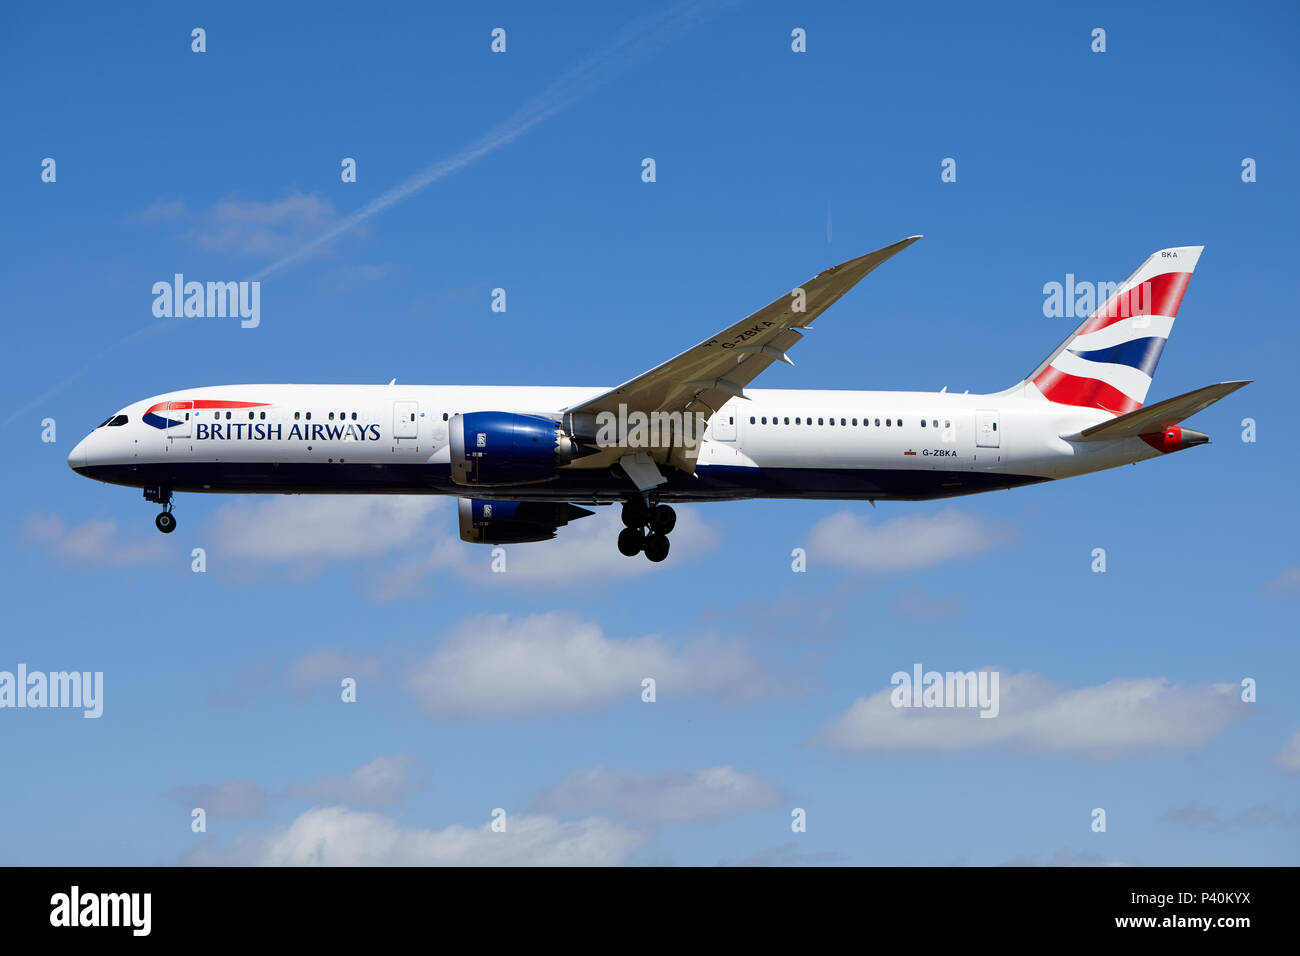 A British Airways Boeing 787-9 Dreamliner aircraft, registration number G-ZBKA, approaching a landing. Stock Photo